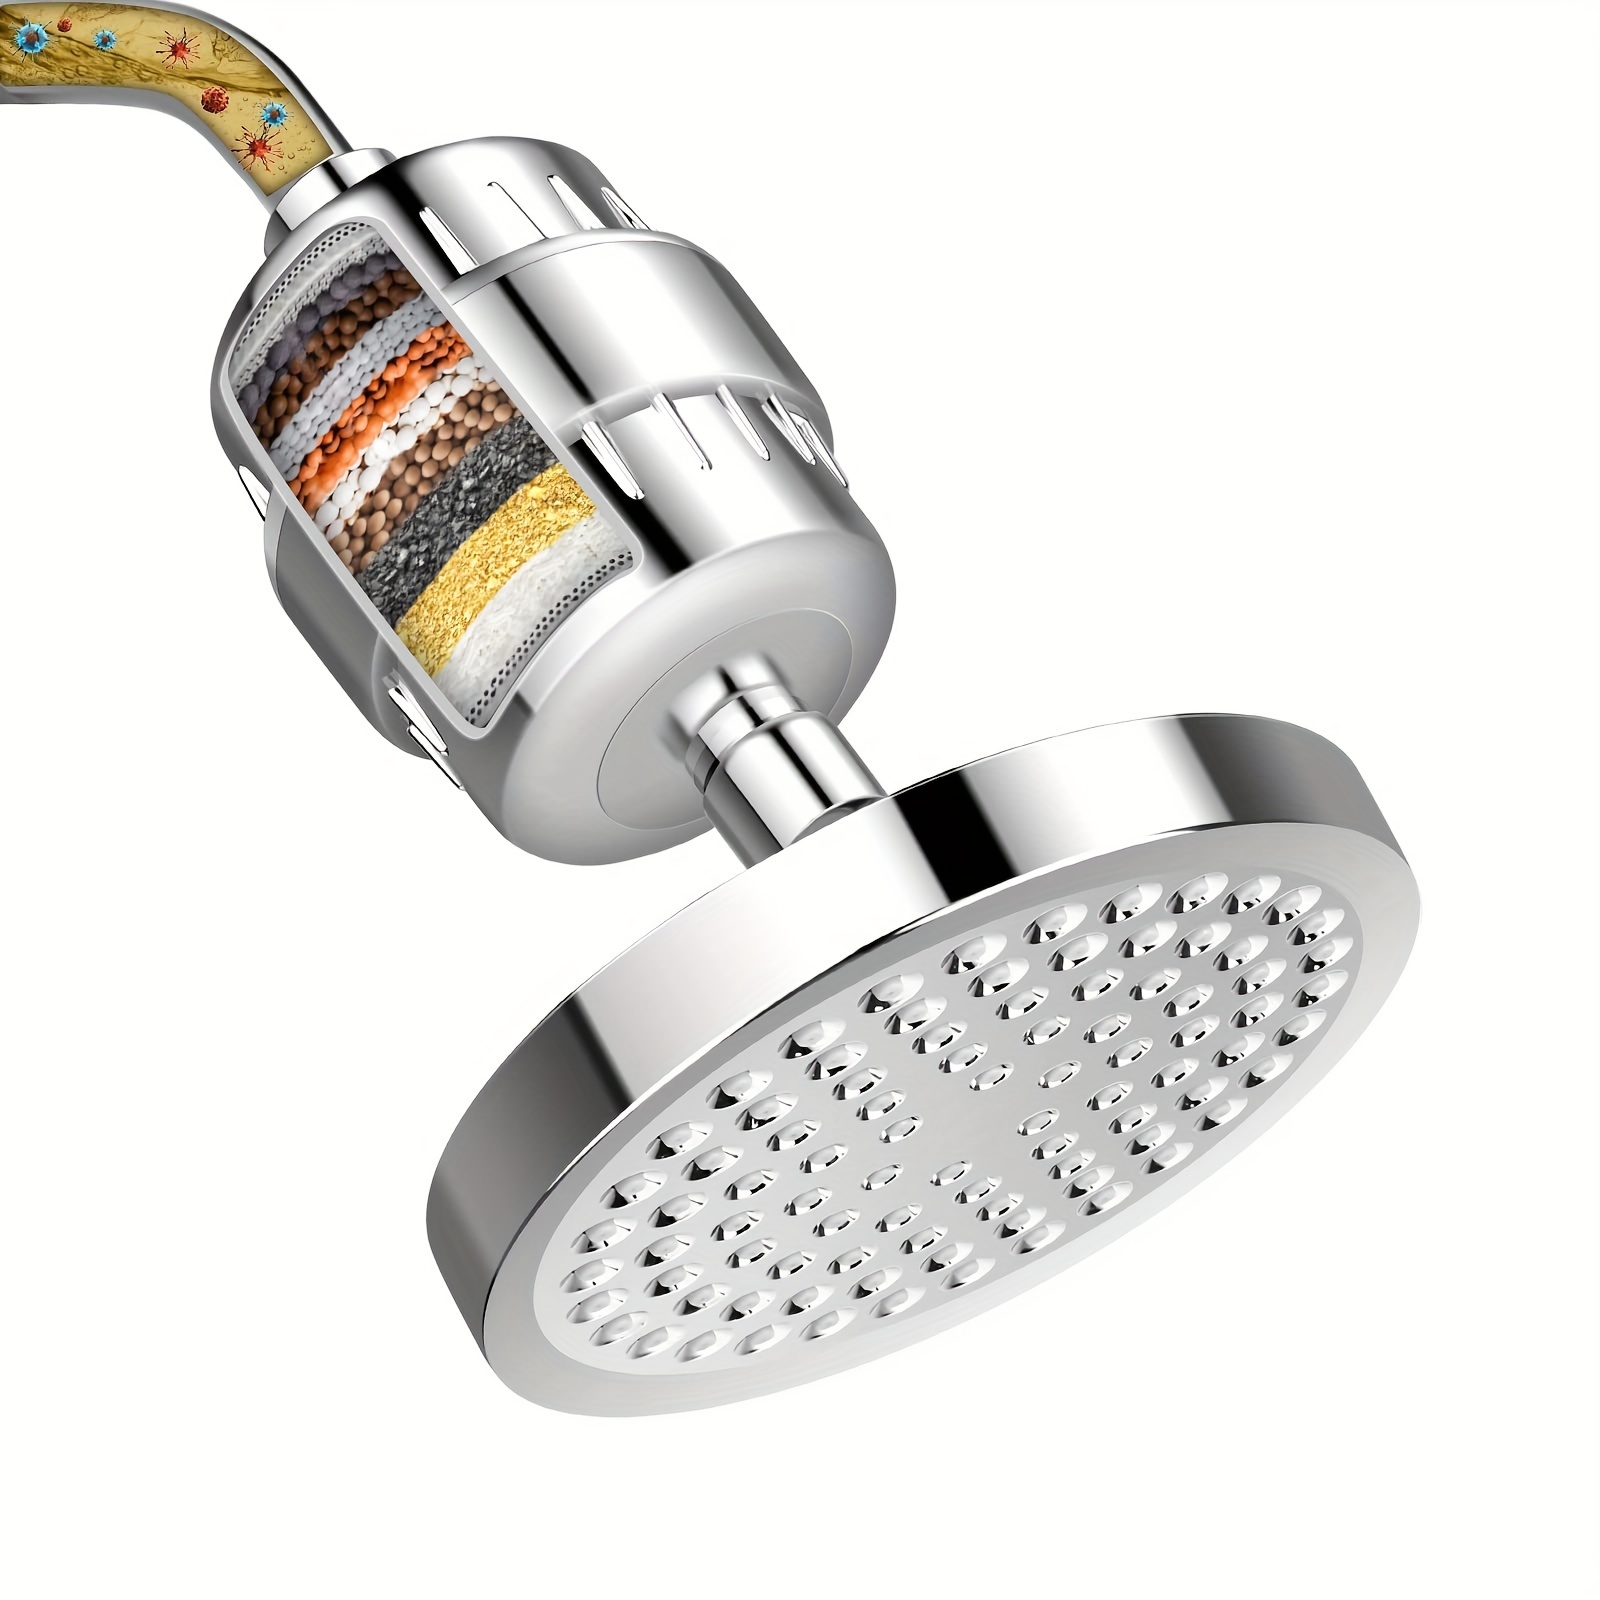 15 Stage Shower Head Filter With Vitamin C High Output Clean - Temu